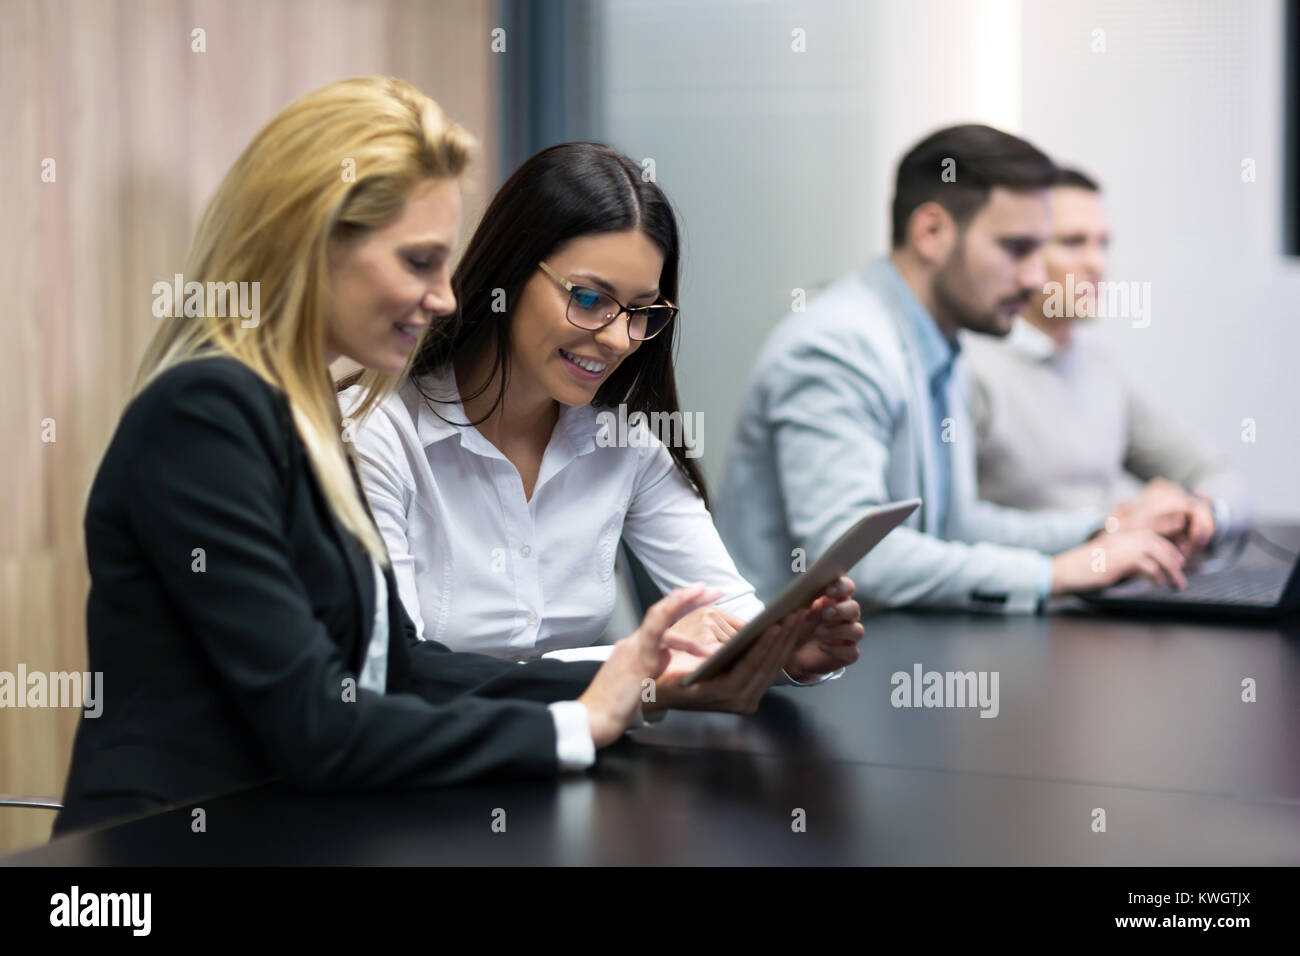 Two businesswomen having discussion in conference room Stock Photo